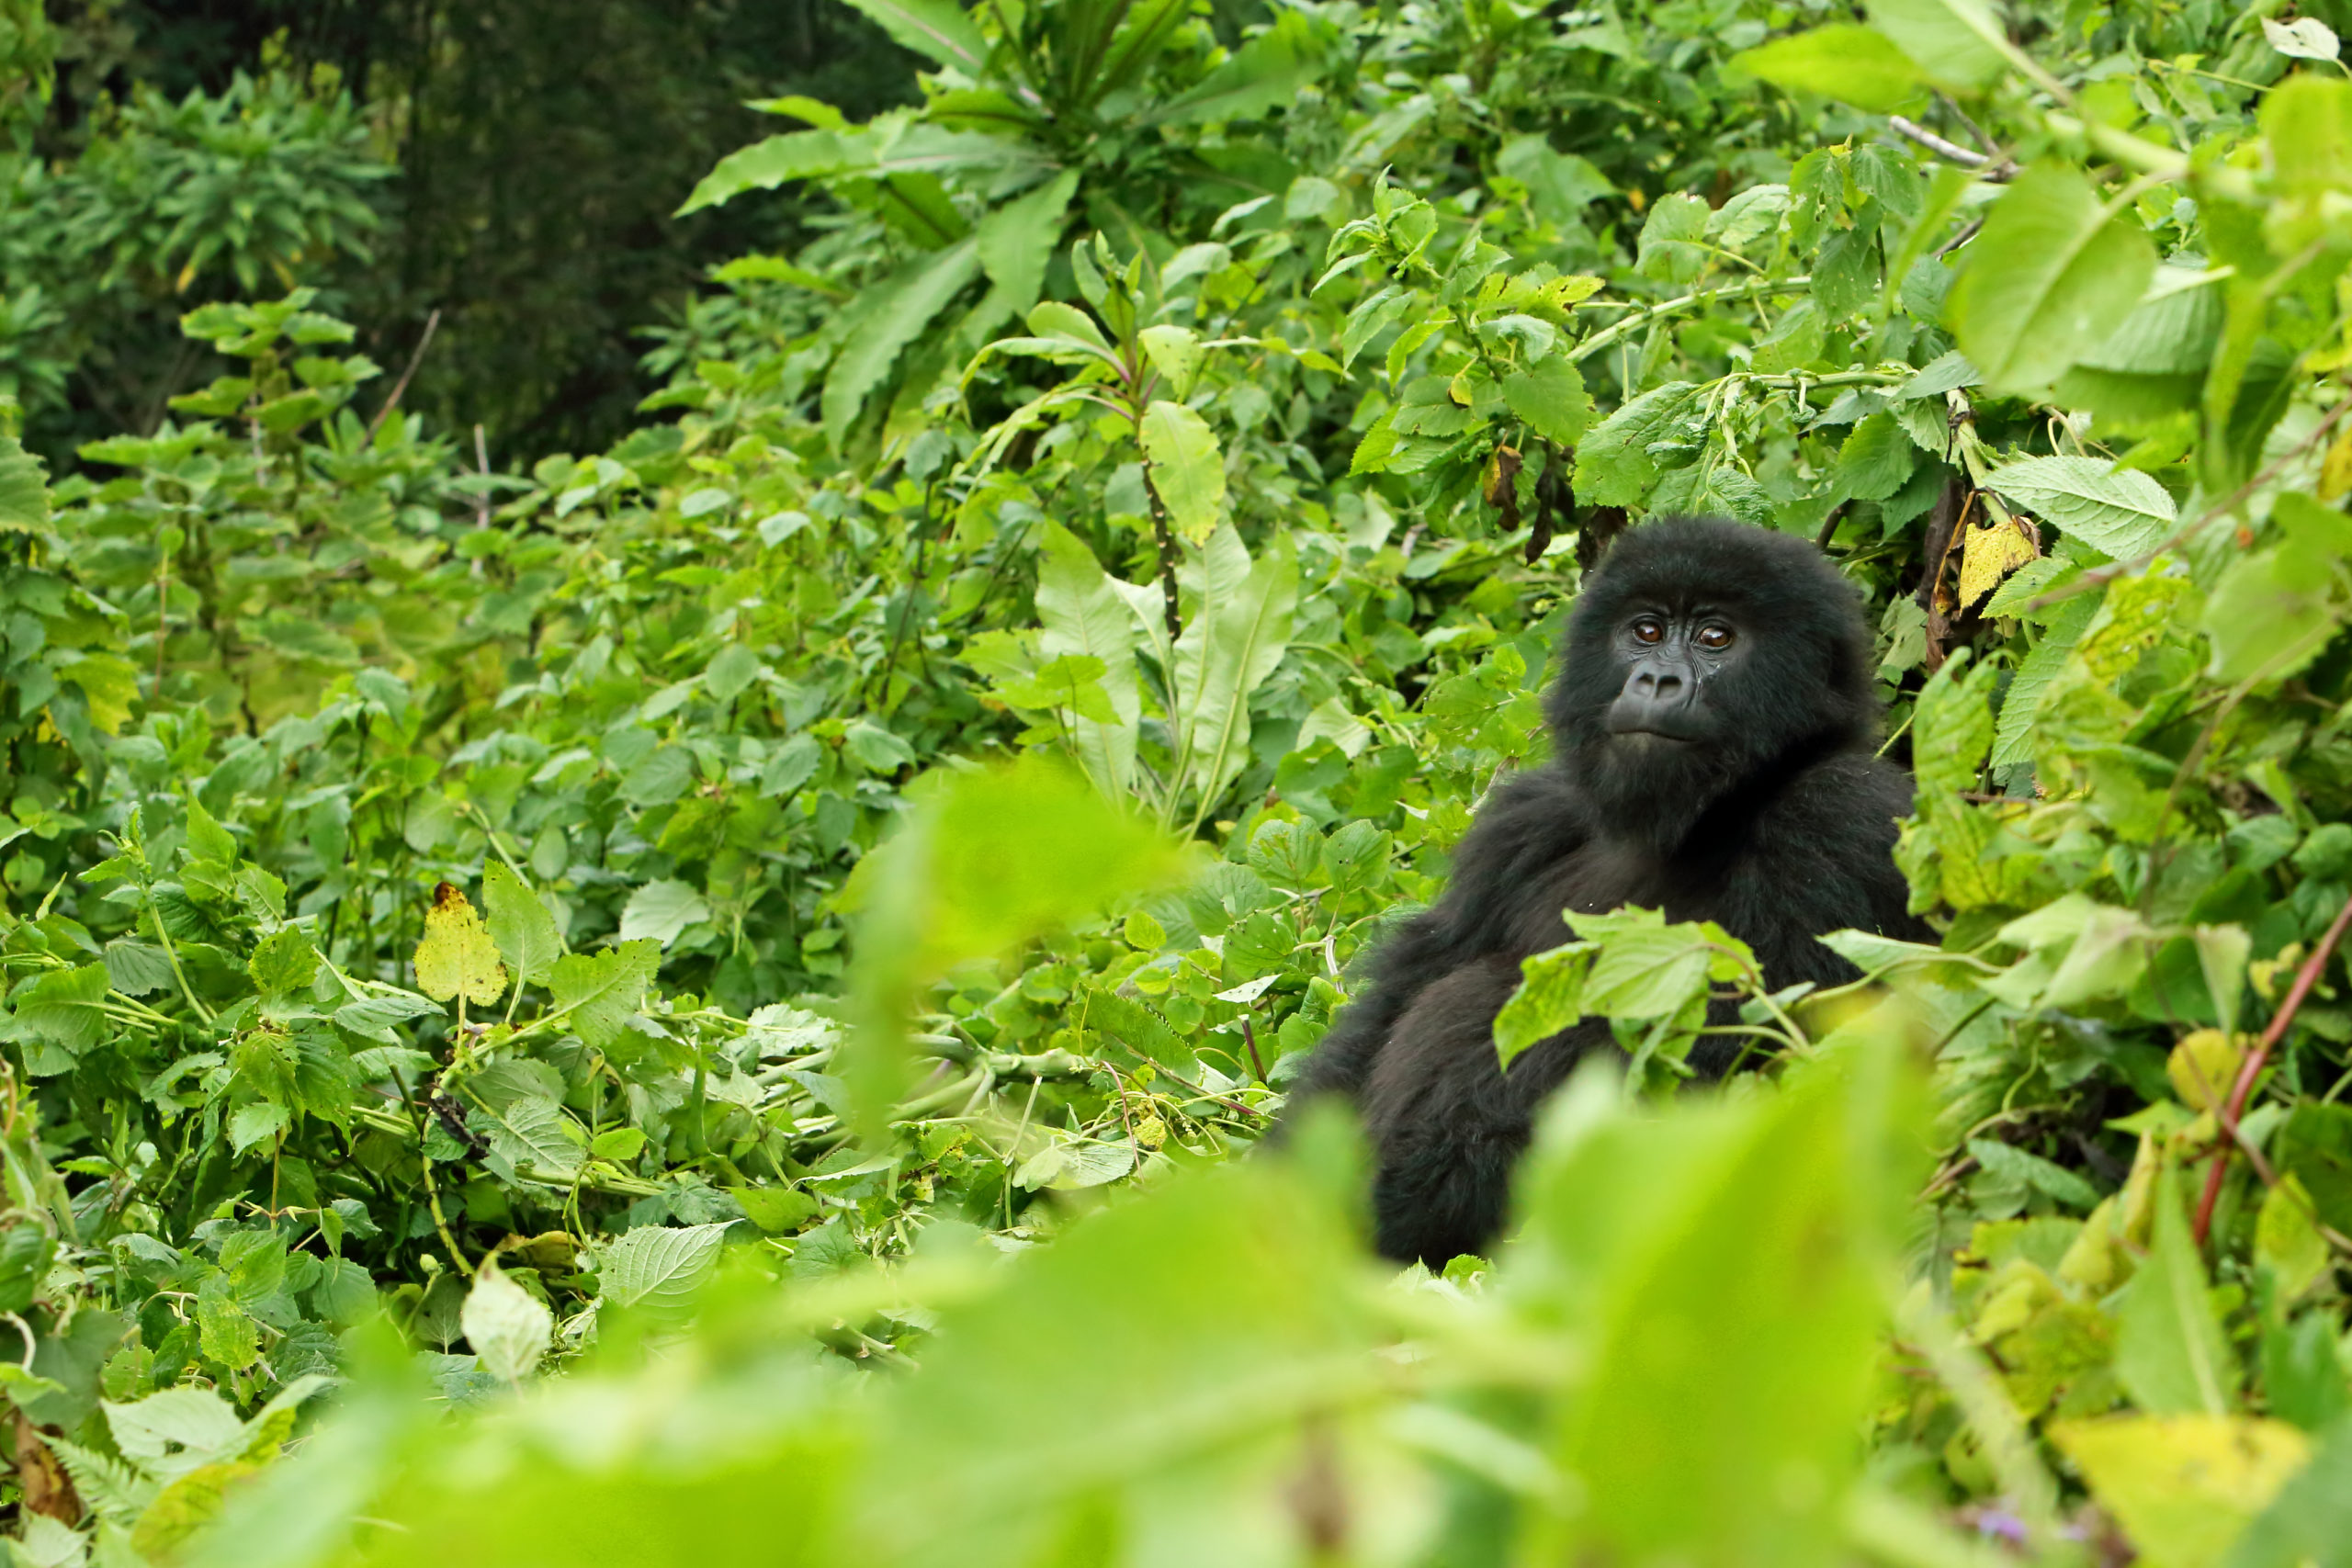 Witness extraordinary creatures like this young baby gorilla in Volcanoes National Park, Rwanda, when you take a tailor-made holiday with Alfred&.